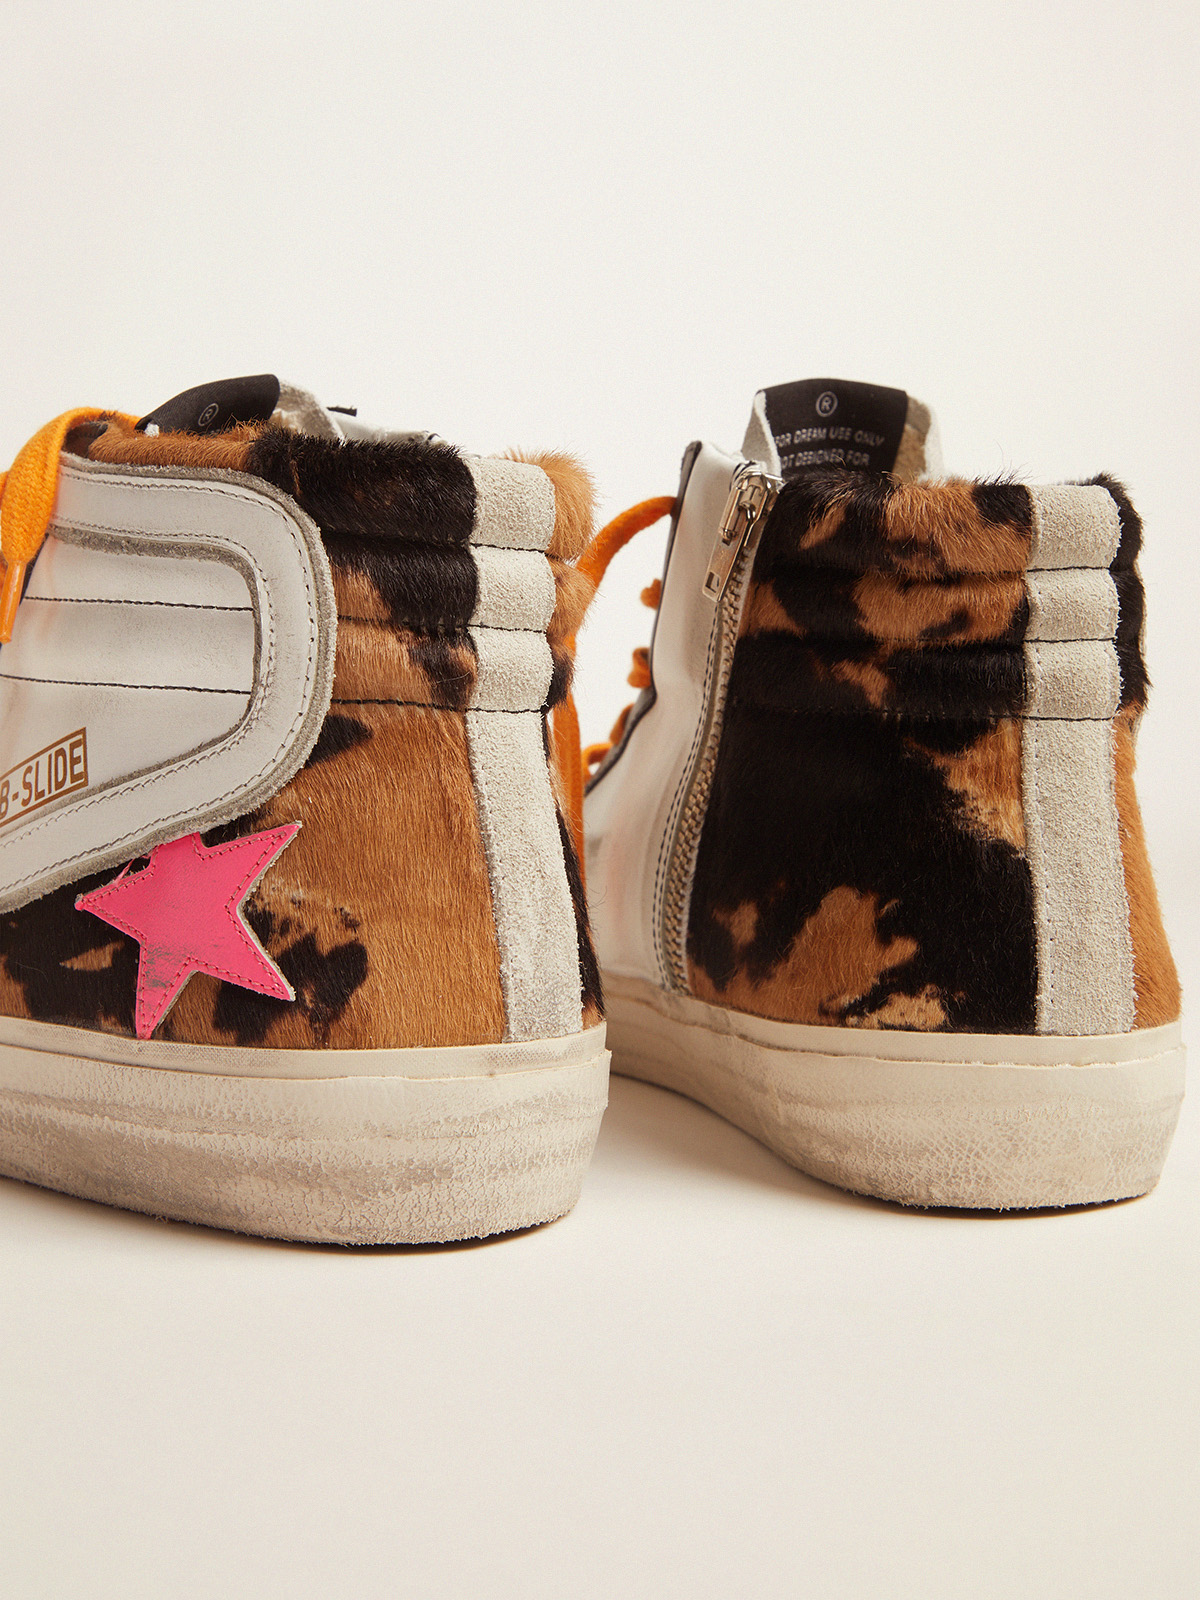 Slide sneakers in pony skin with orange laces and a fuchsia star | Golden  Goose